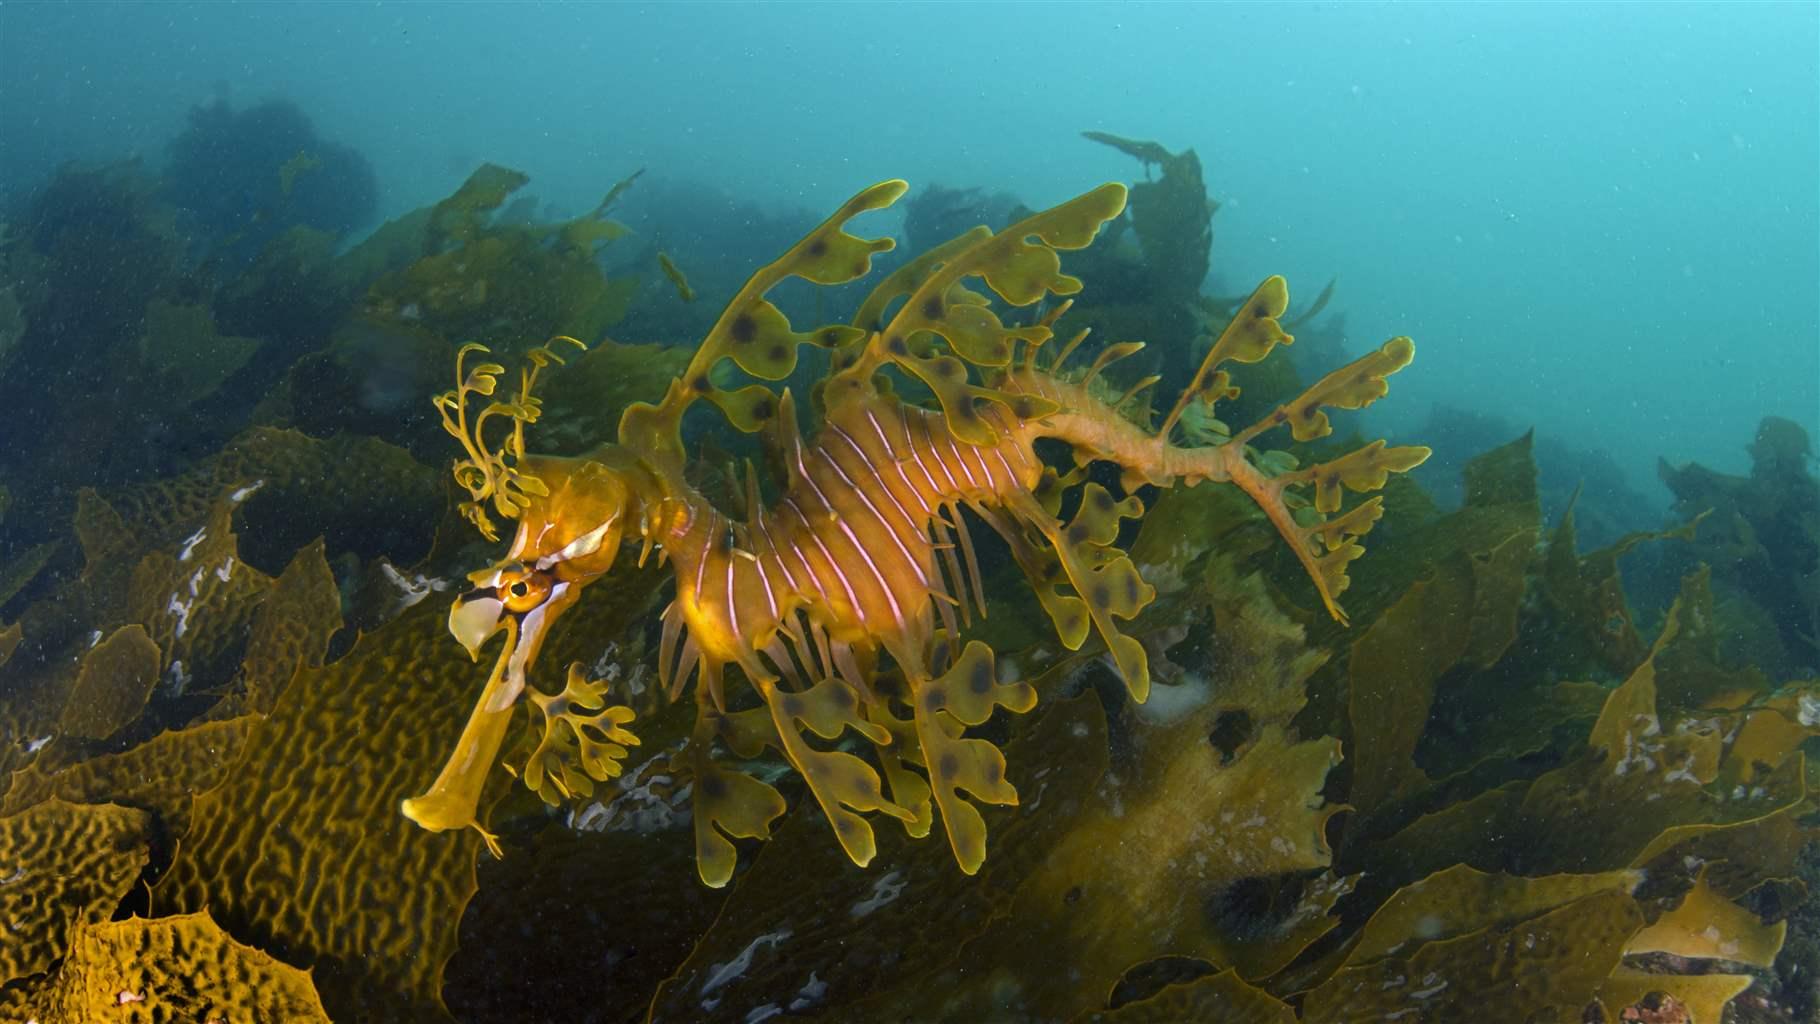 Leafy green and yellow sea dragon swimming over a patch of kelp.